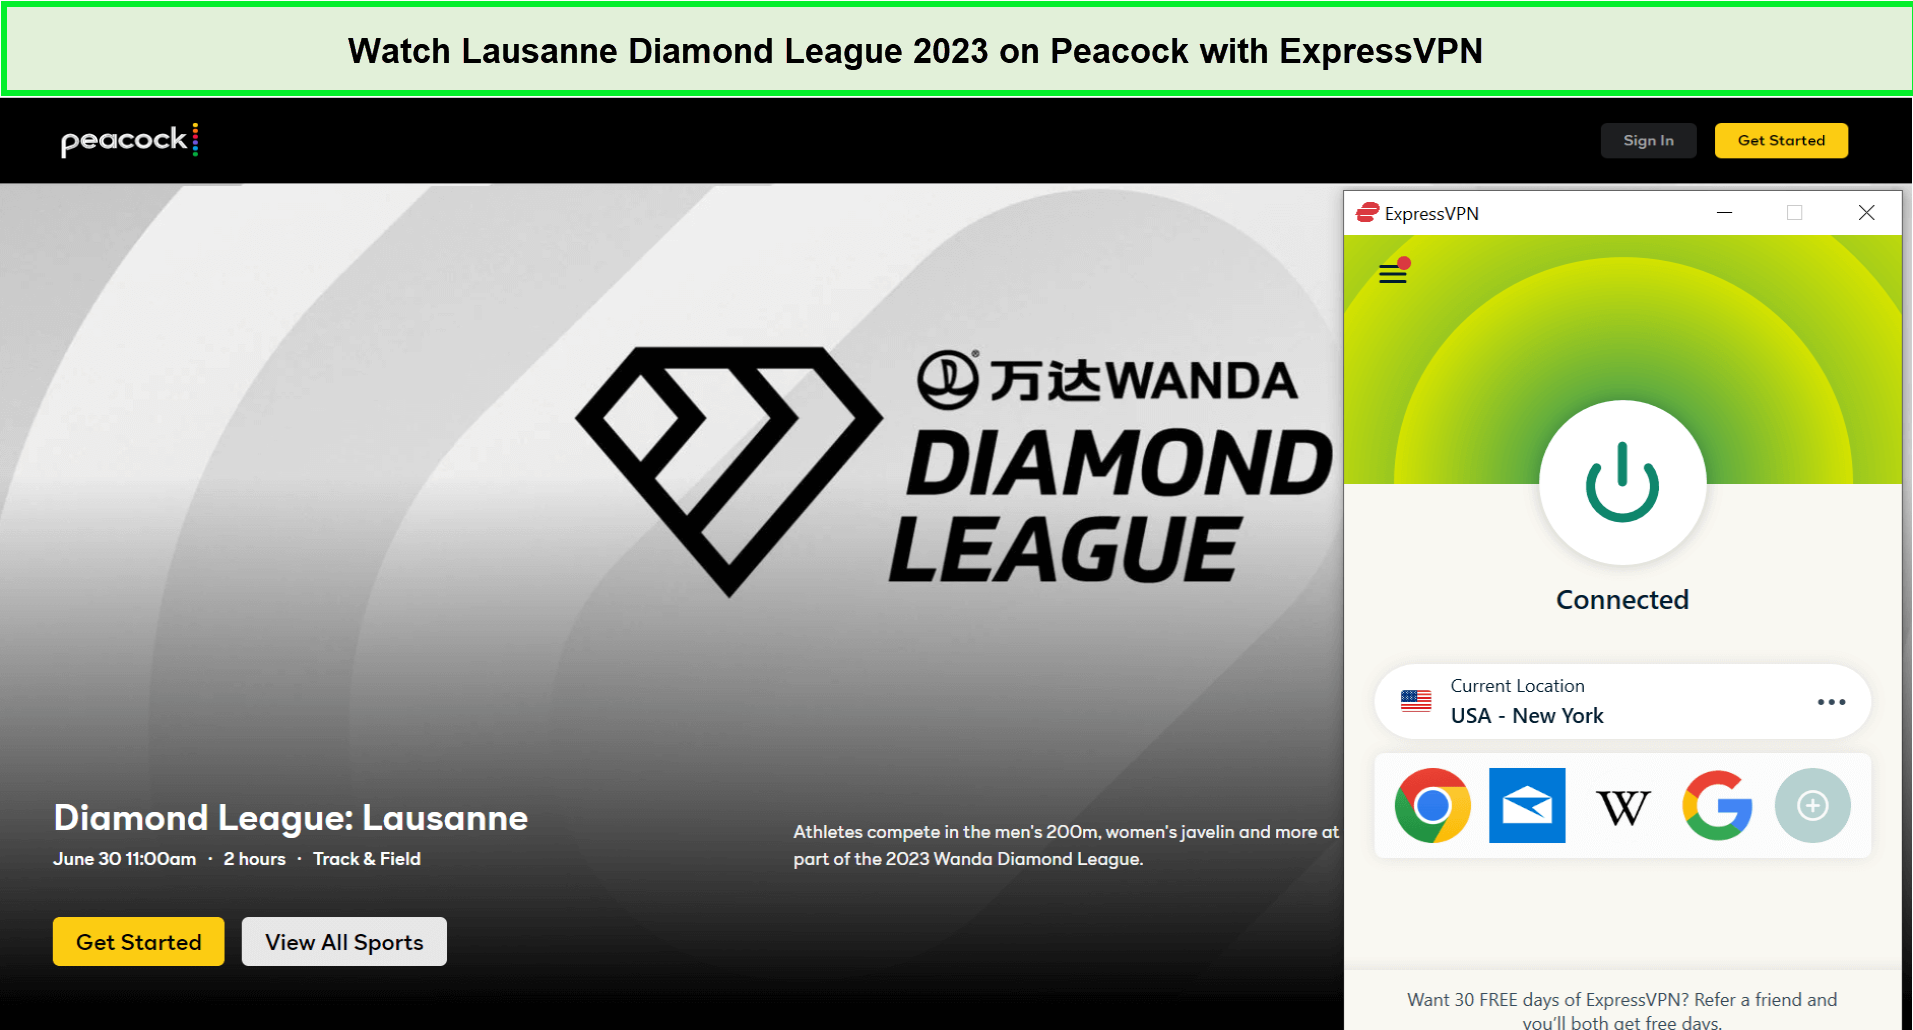 Watch-Lausanne-Diamond-League-2023-in-Singapore-on-Peacock-with-ExpressVPN